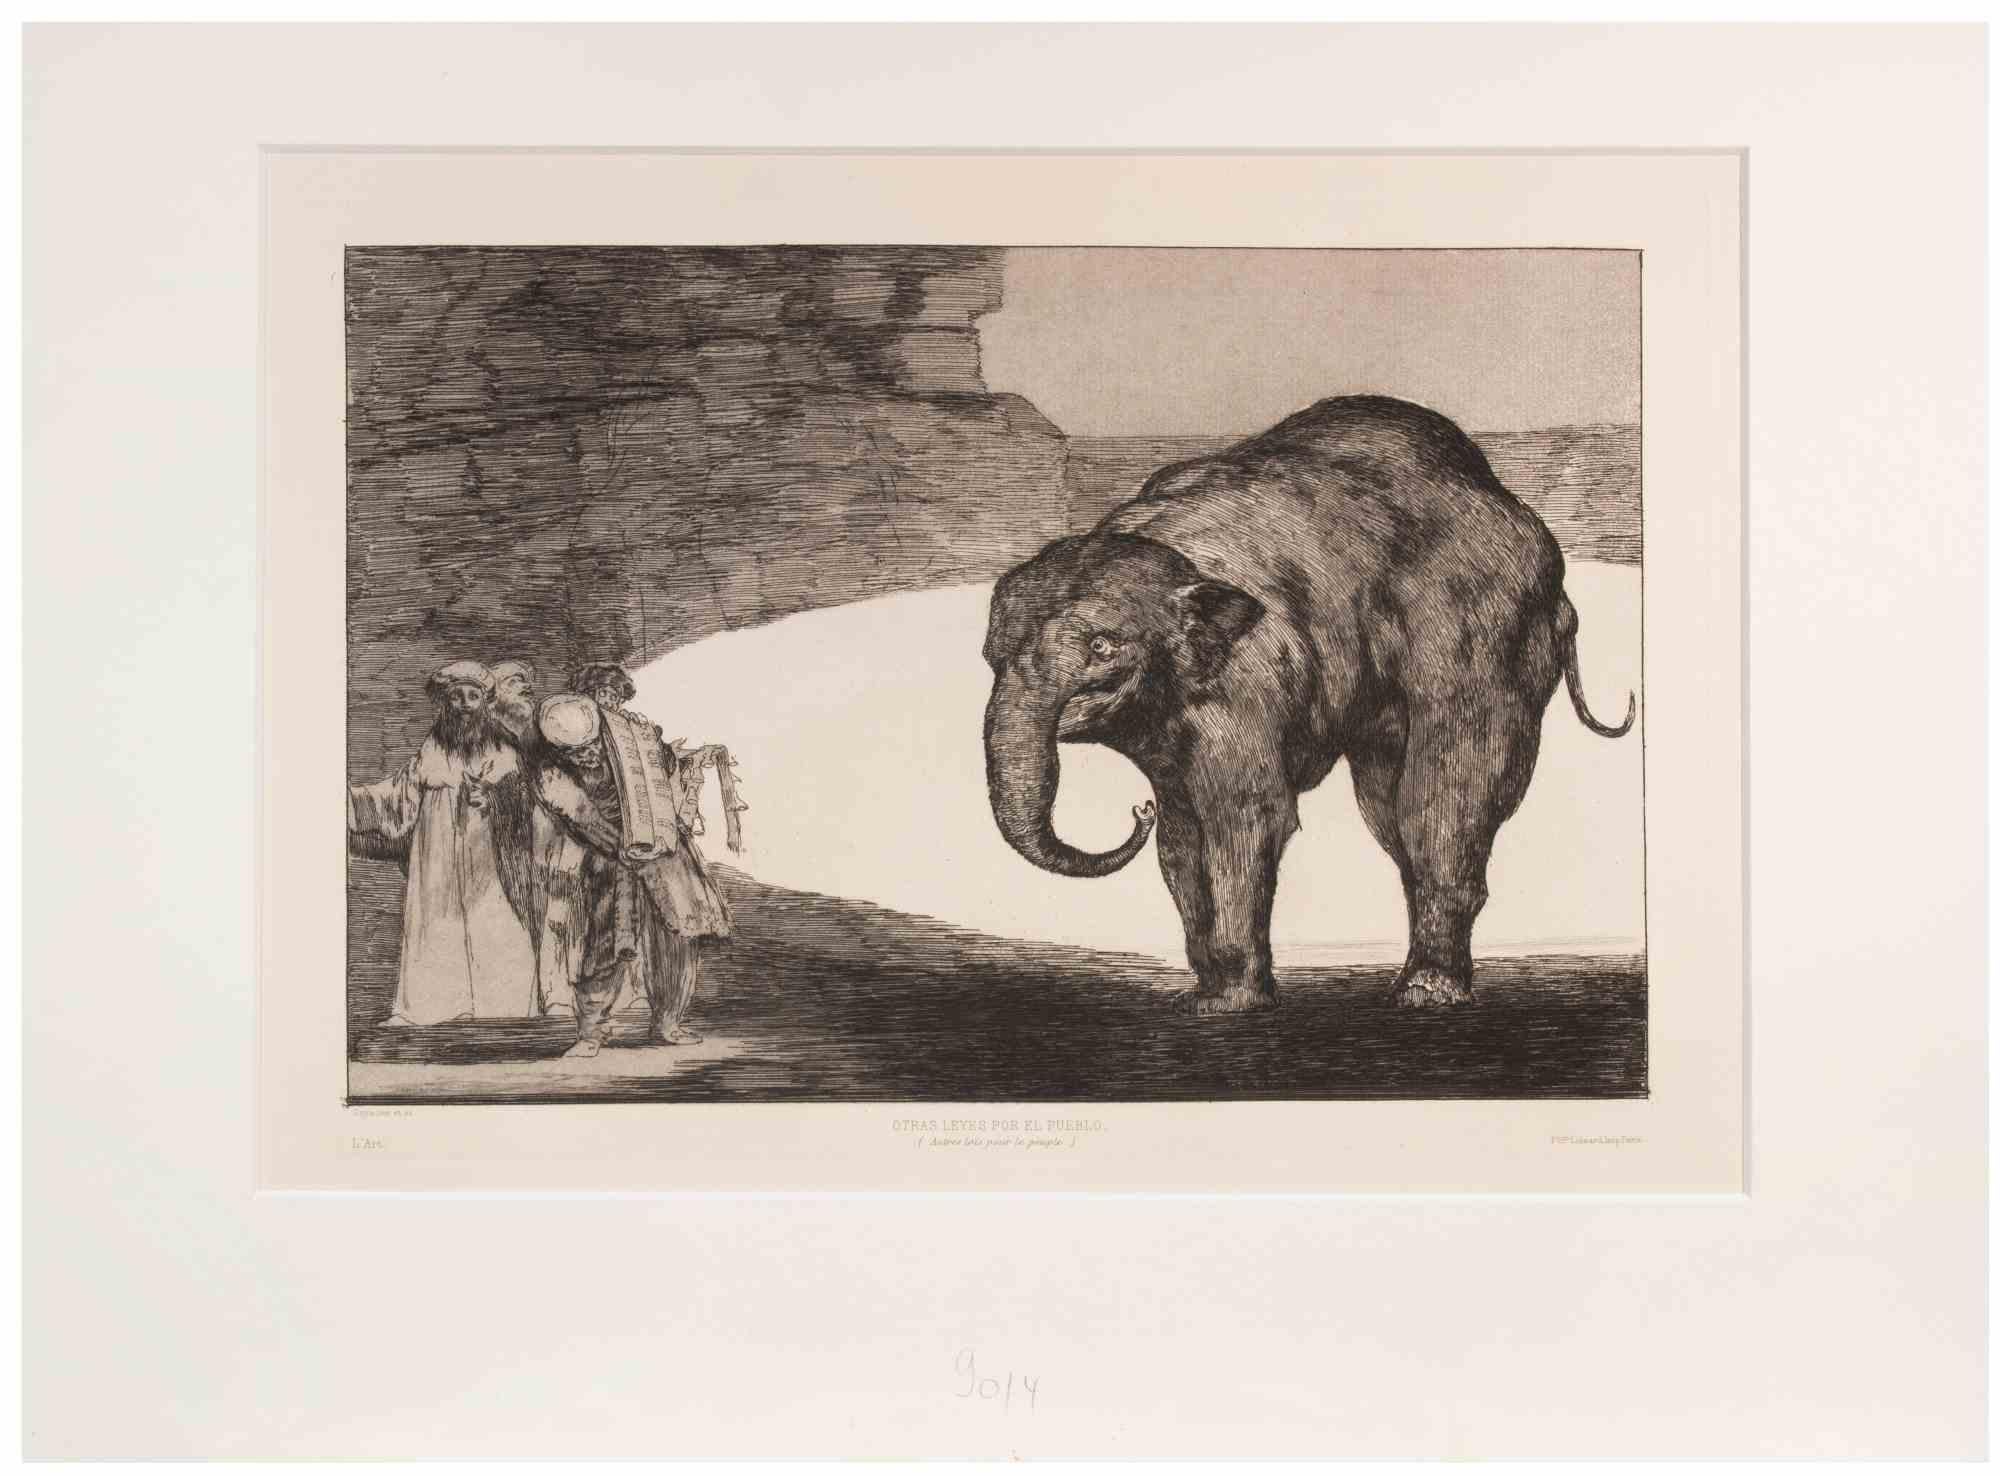 Otras Leyes por el Pueblo is a  modern artwork realized by Francisco Goya.

Etching and Aquatint, from the Series "Los Proverbios", realized in 1815.

This copy belongs to the edition of "L'Art", published in 1877.

Very good condition.